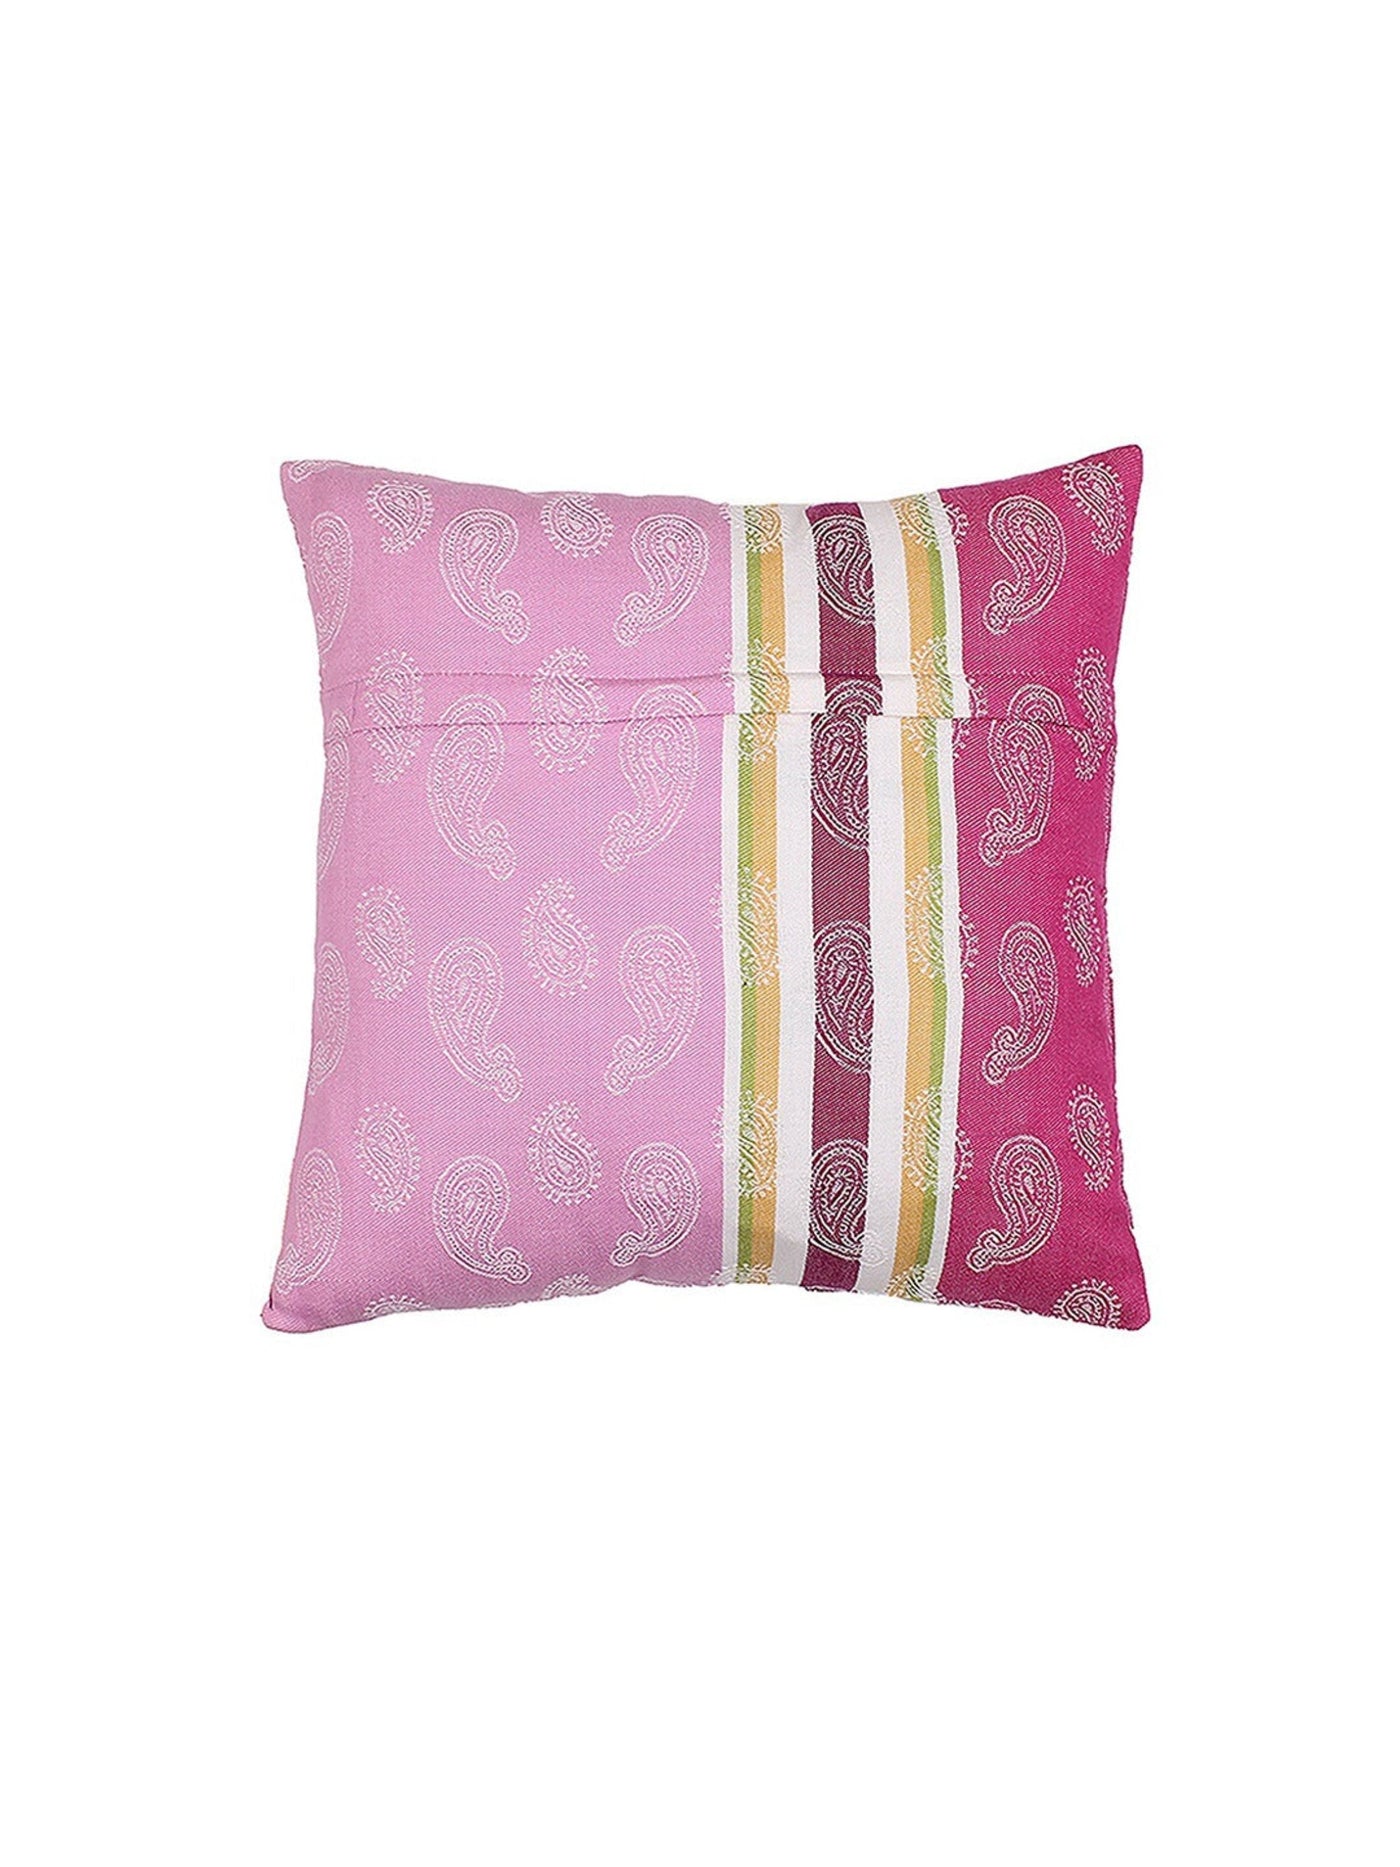 Cushion Cover - Finished Goods-Living-2 s-8903773000920